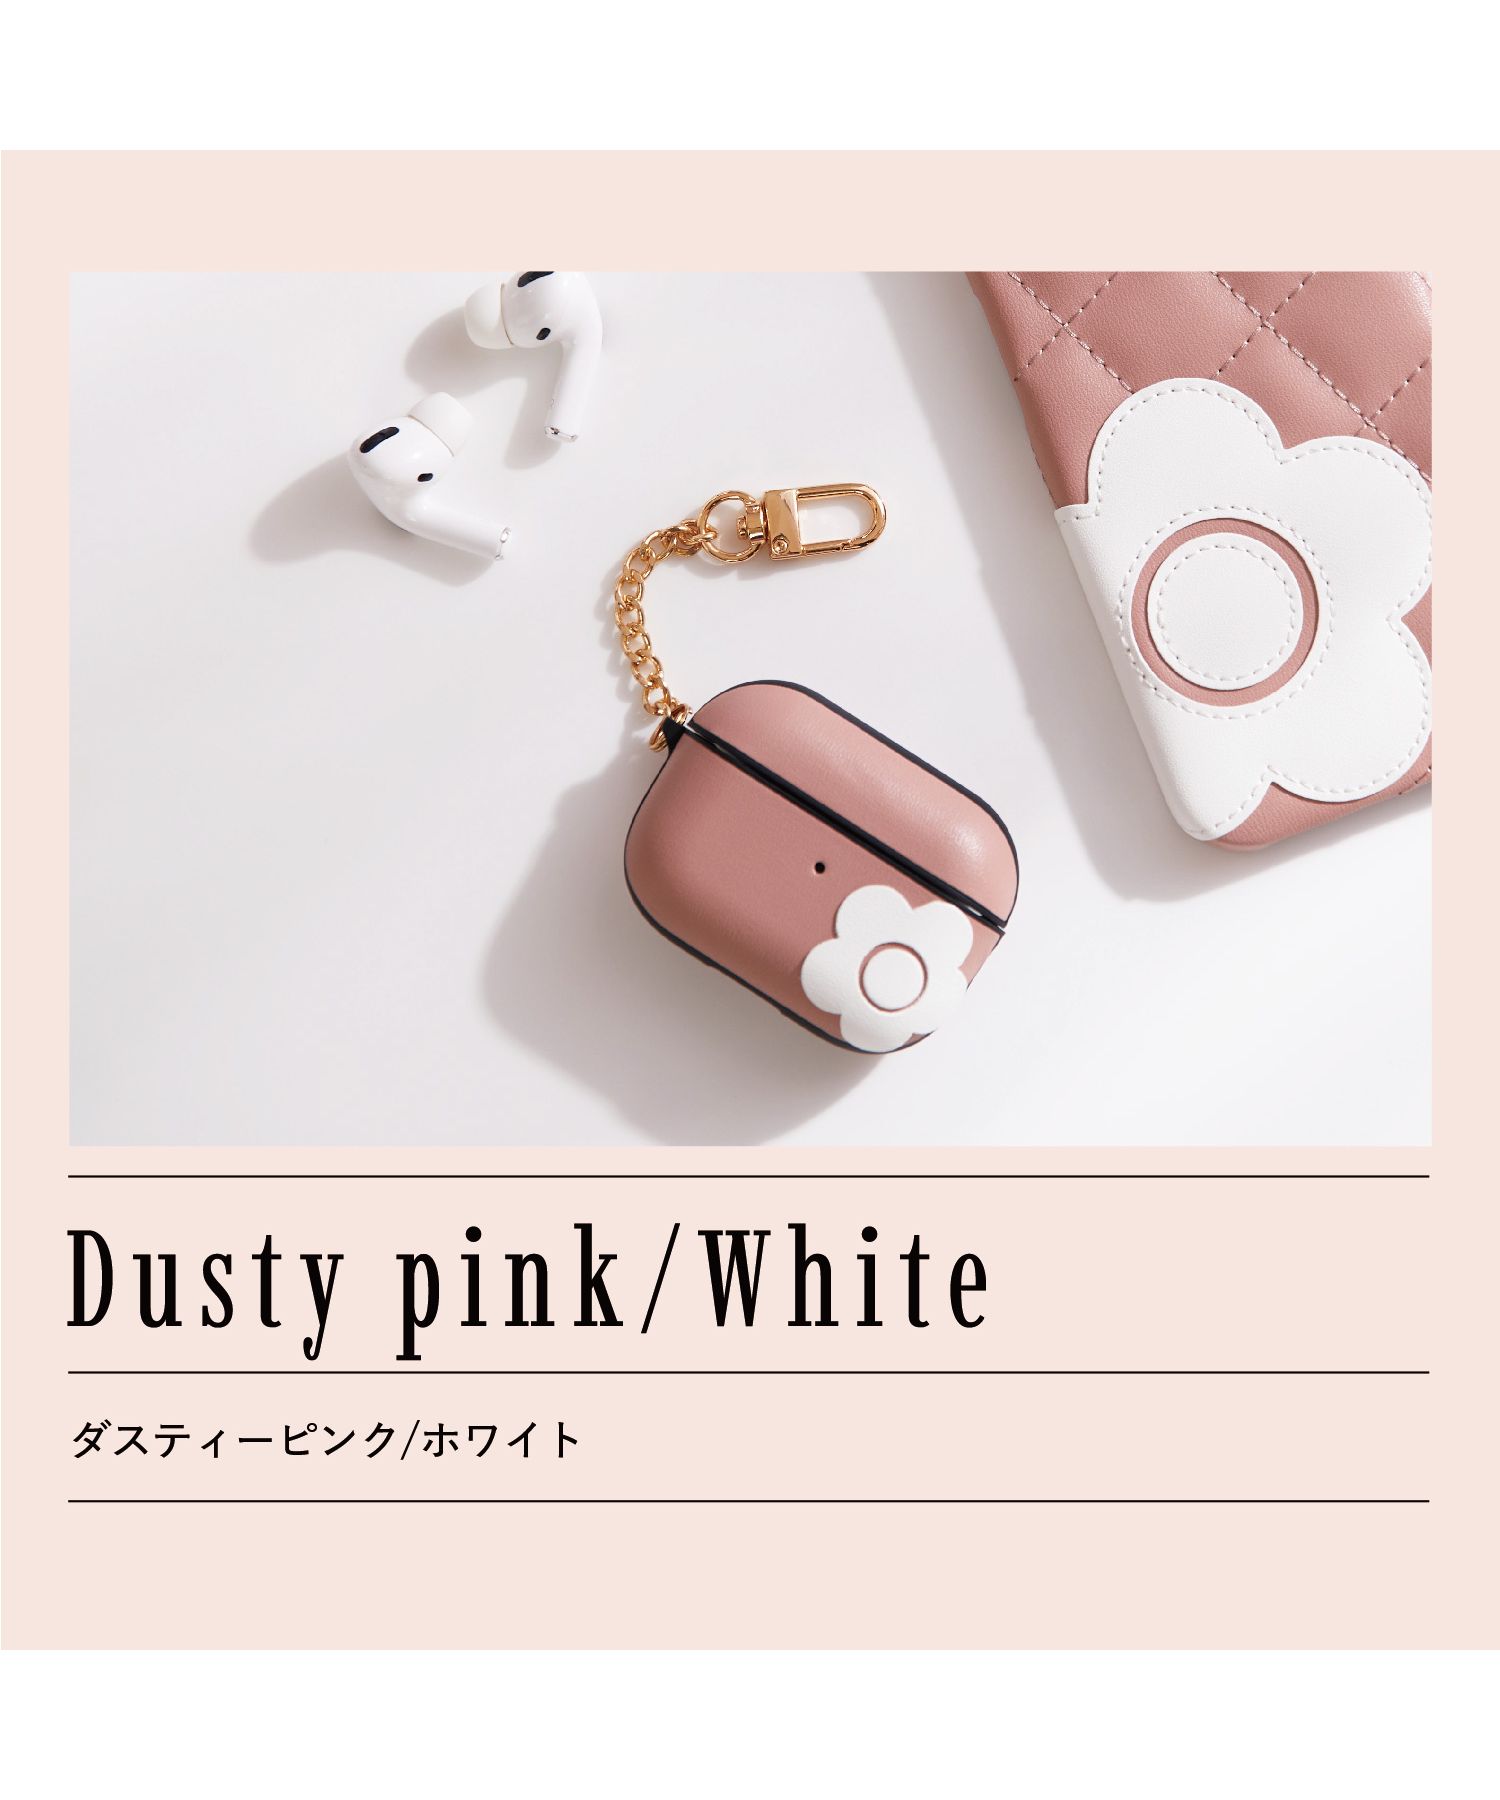 MARY QUANT マリークワント エアーポッズプロ 第2世代 AirPods Pro